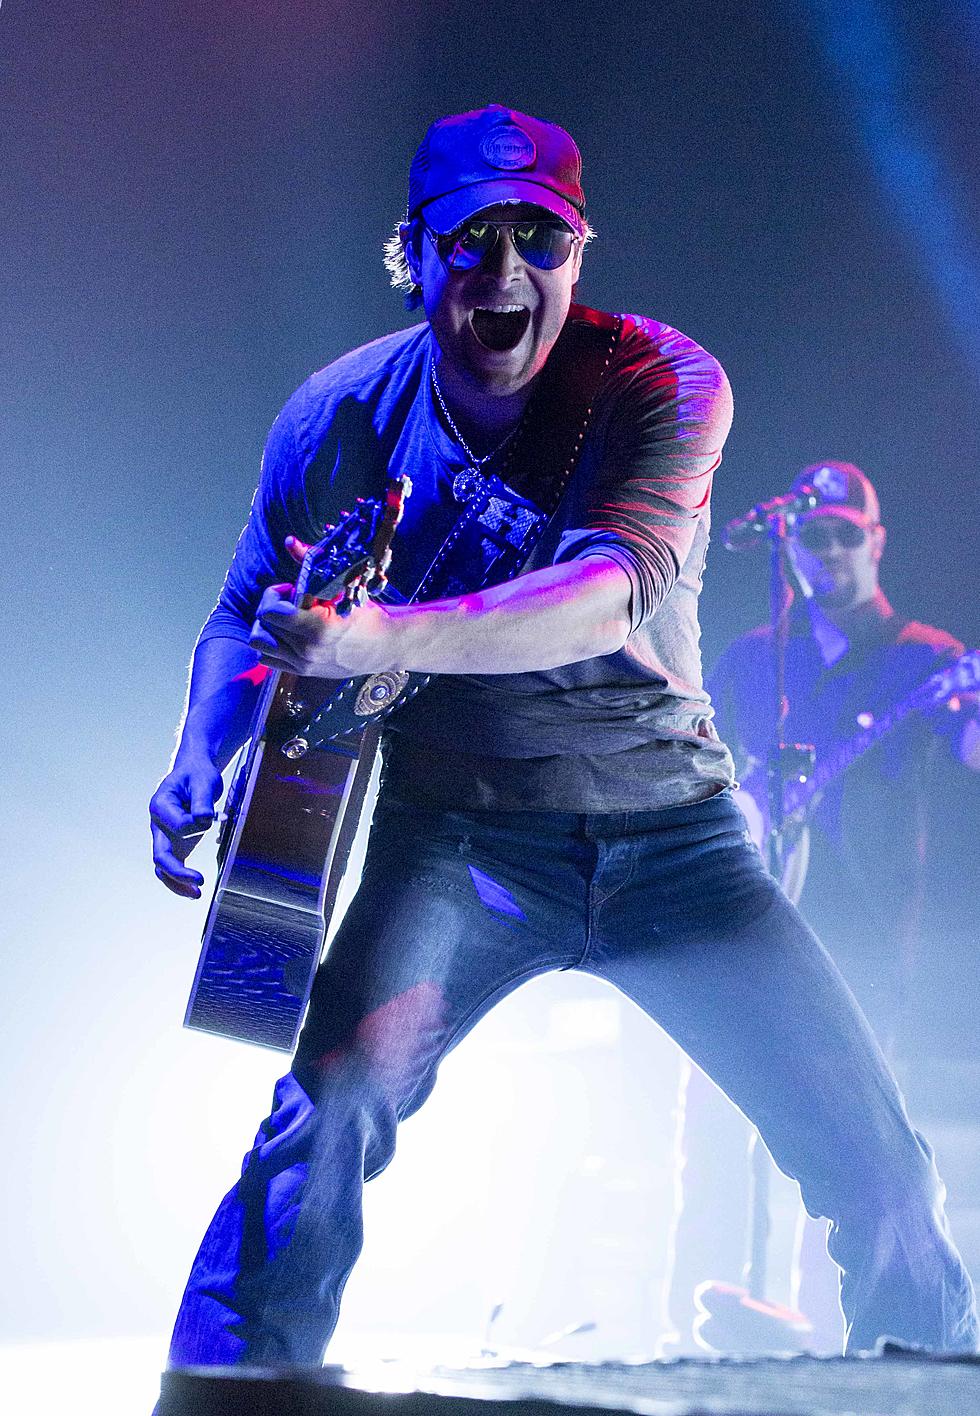 Click & Watch: Eric Church’s AOL Sessions Interview About Latest Album [VIDEO]